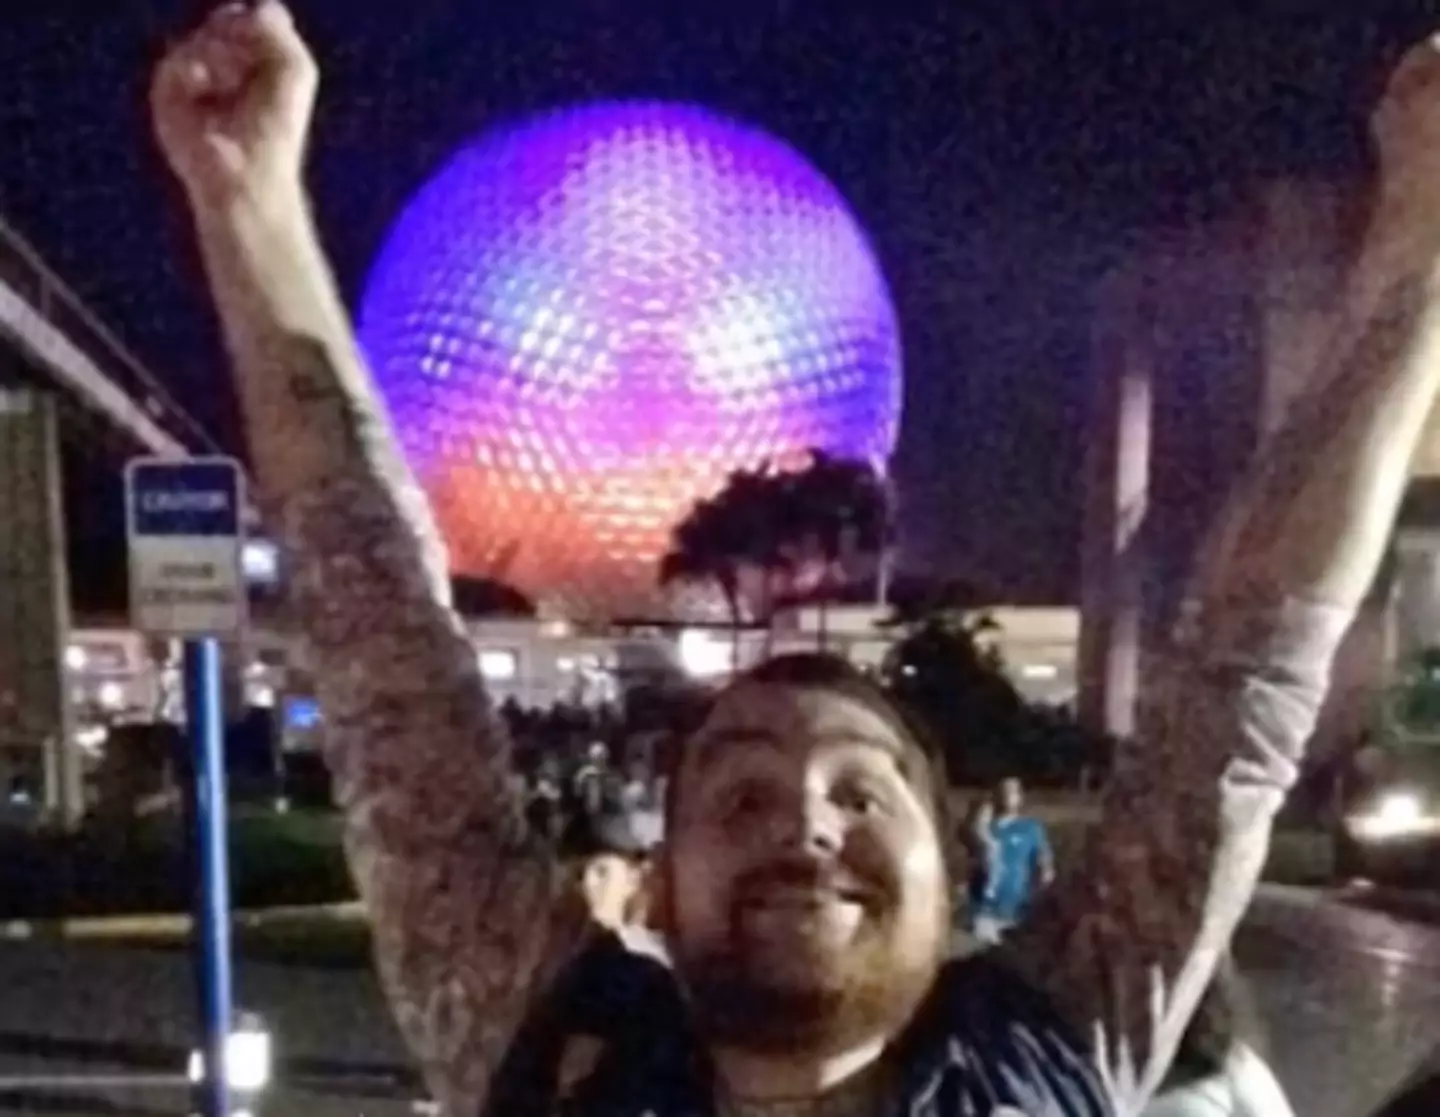 He even went to Epcot on his way out.